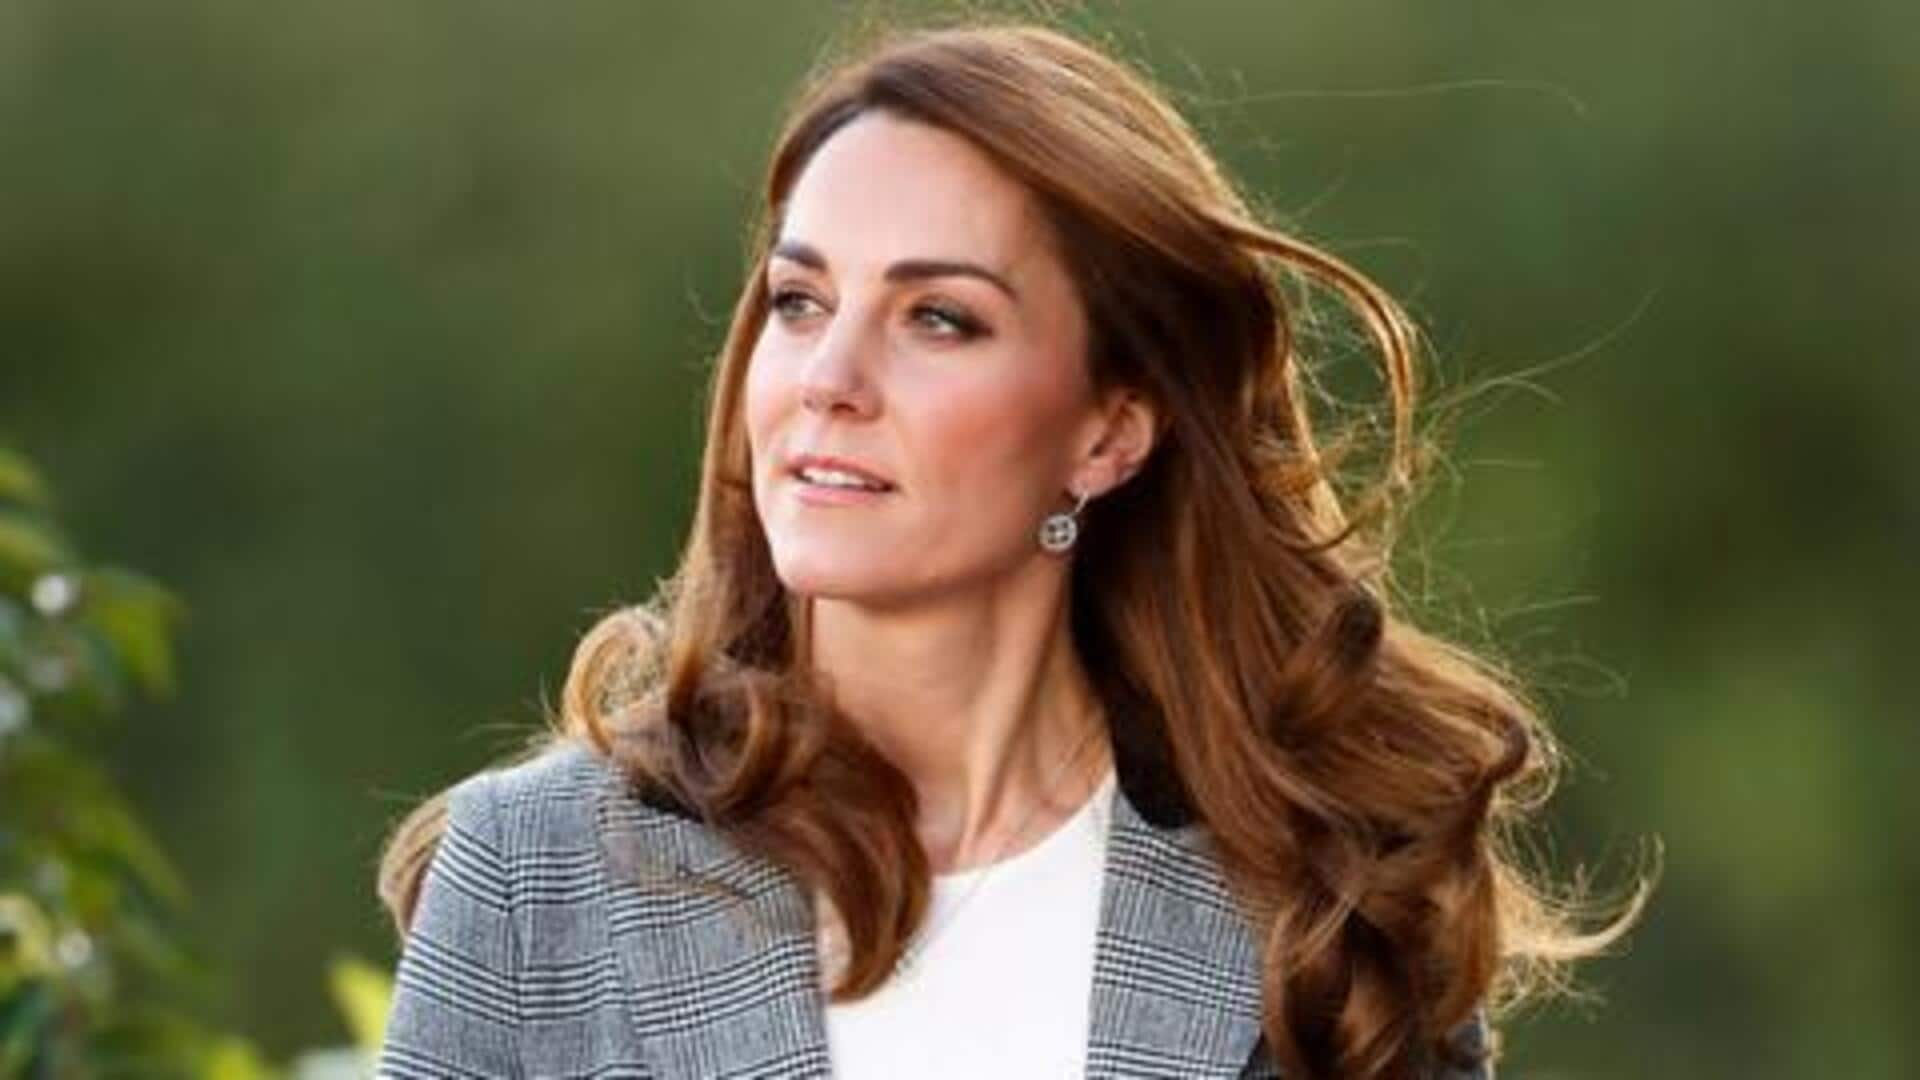 Princess Kate Middleton has 'turned a corner' with cancer treatment